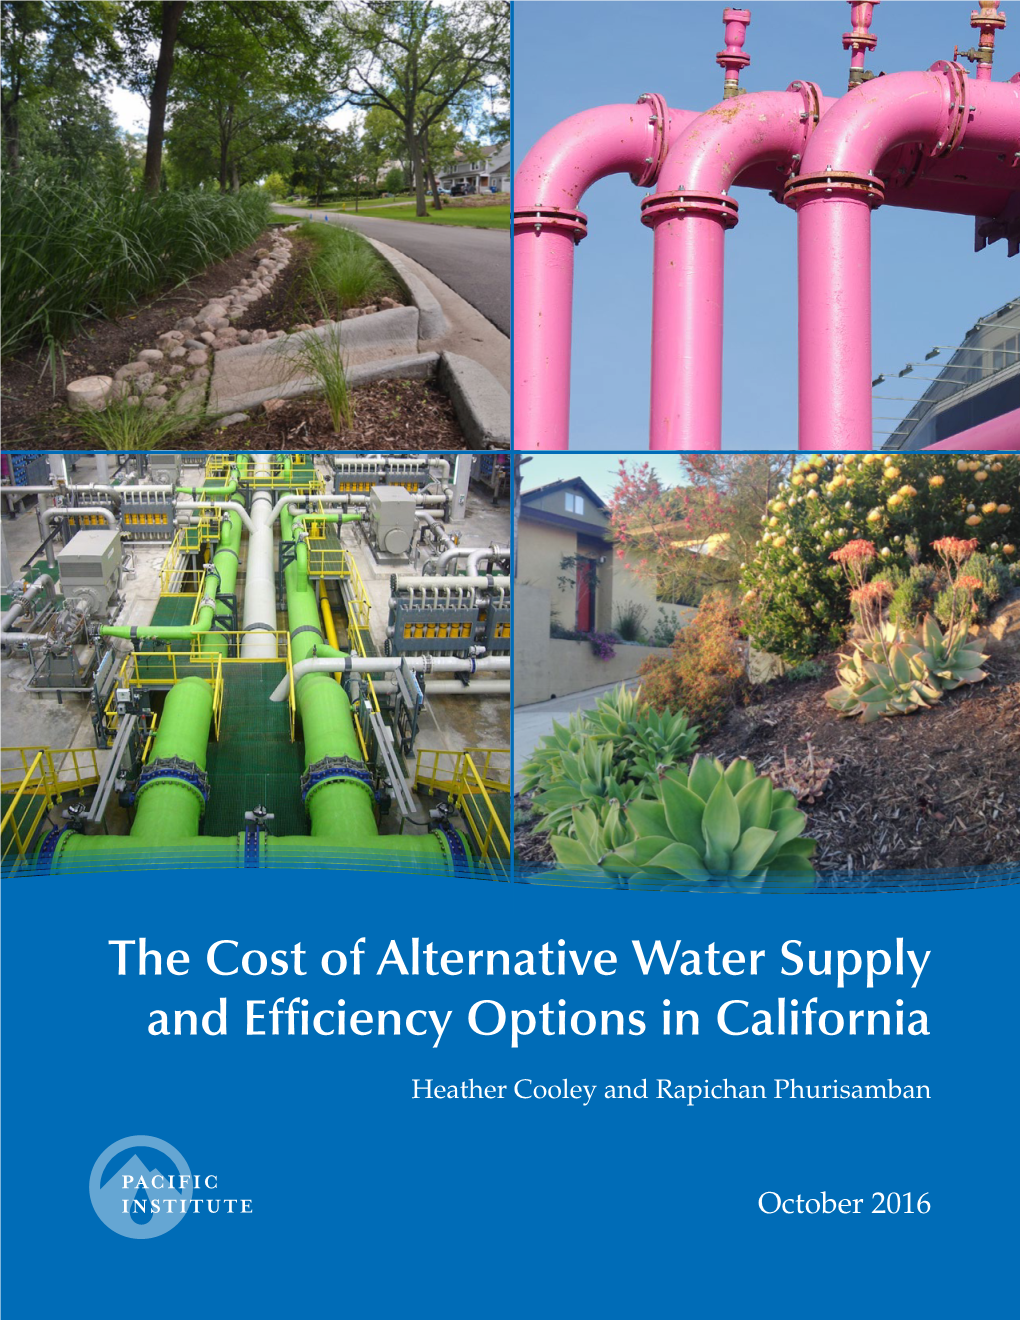 The Cost of Alternative Water Supply and Efficiency Options in California